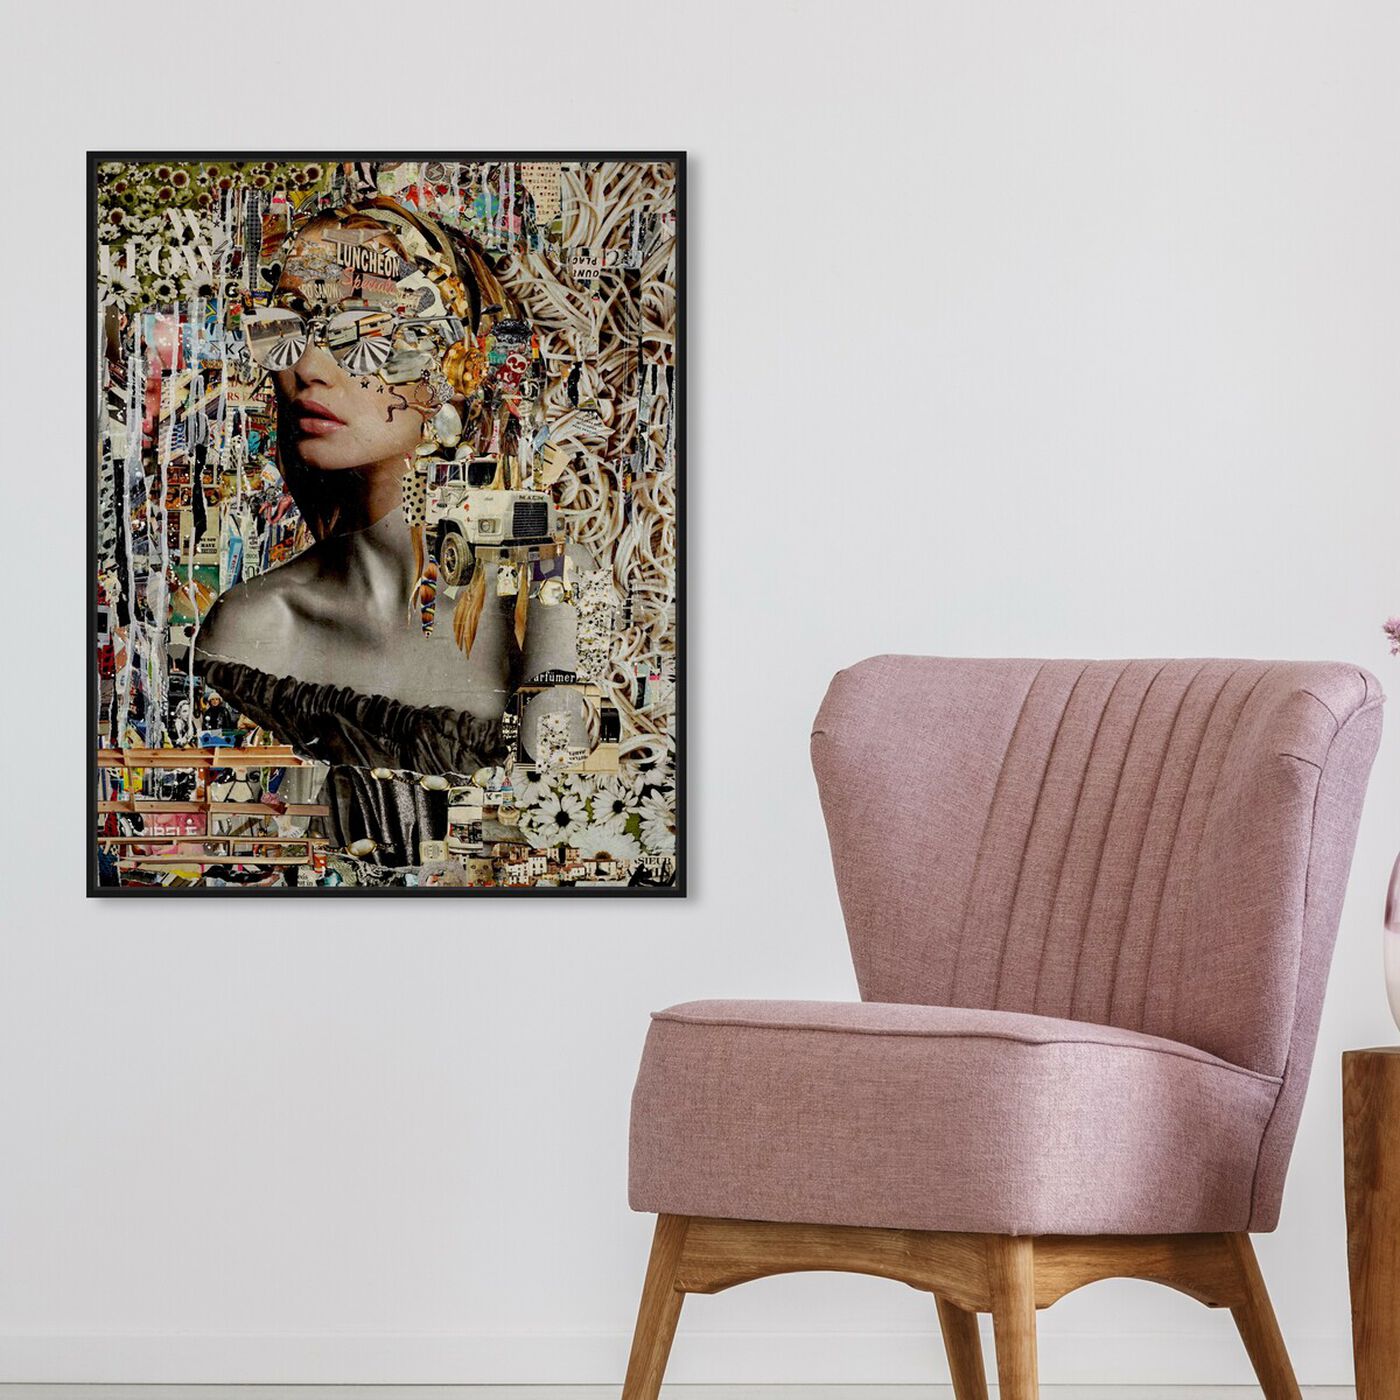 Hanging view of Katy Hirschfeld - Flower Modern featuring fashion and glam and portraits art.